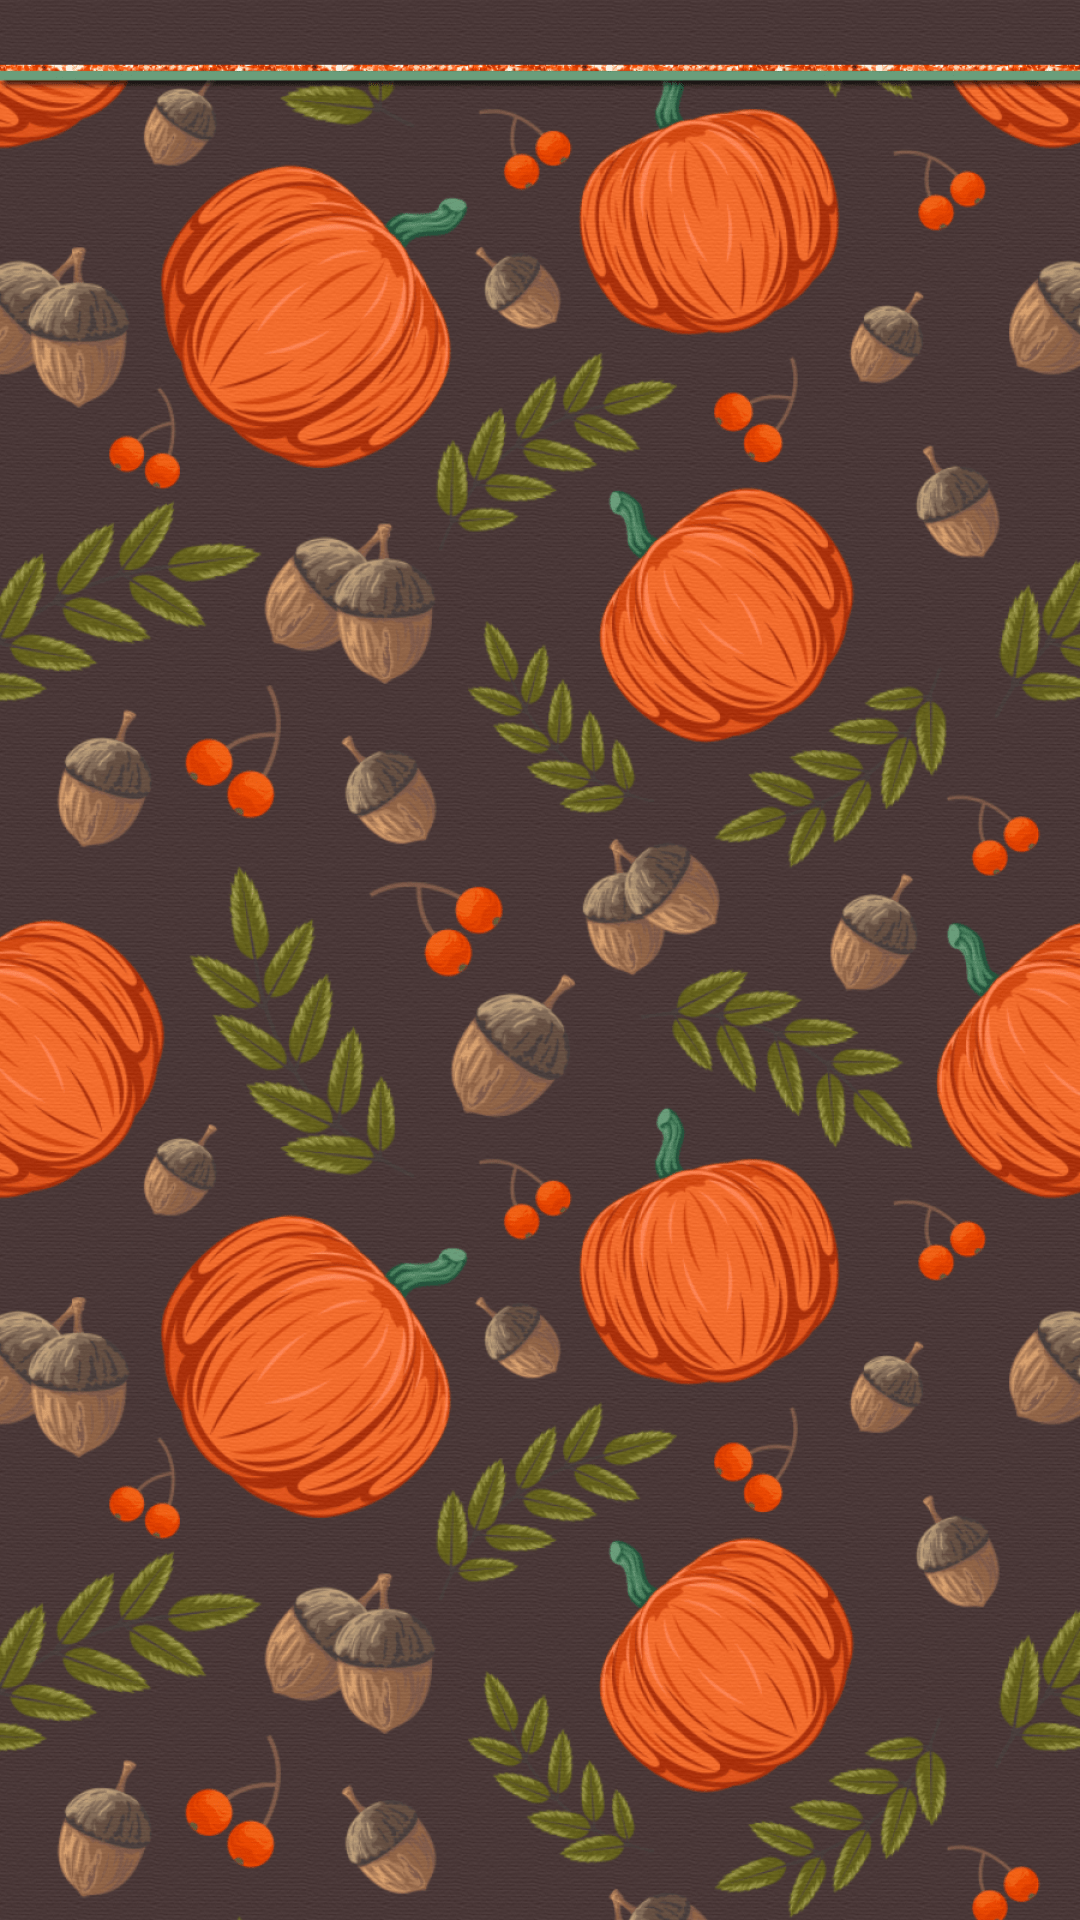 A phone wallpaper with pumpkins, leaves, and acorns on a brown background - Fall, Thanksgiving